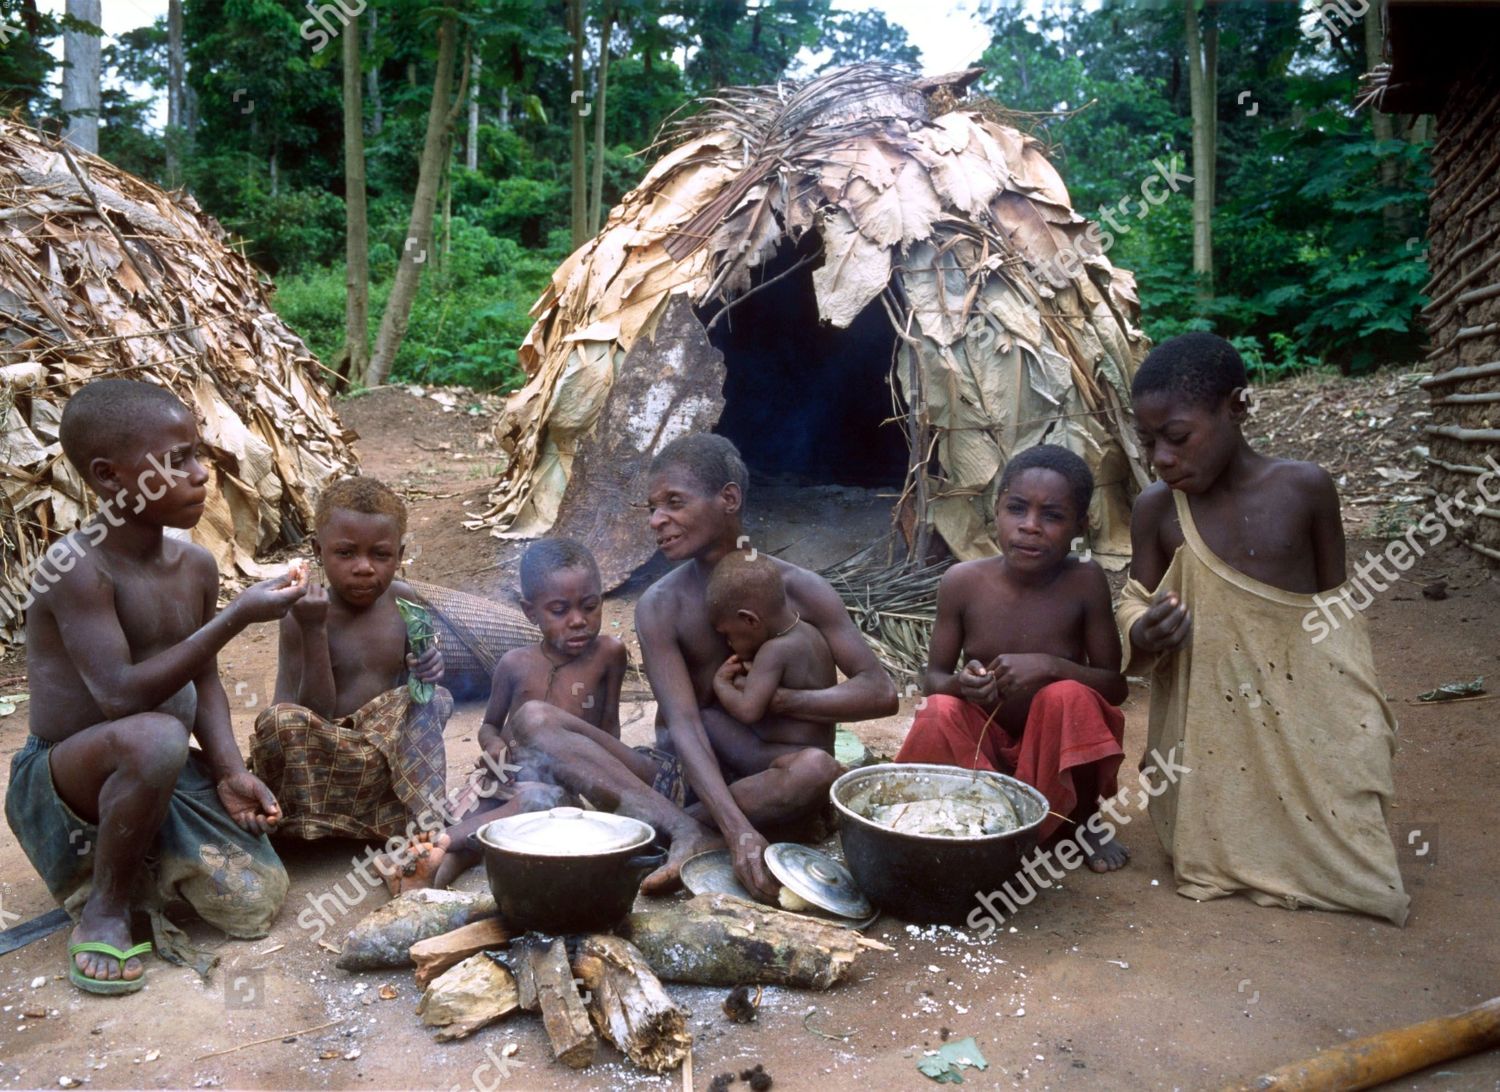 among-the-pygmies-central-african-republic-africa-shutterstock-editorial-425919ad.jpg